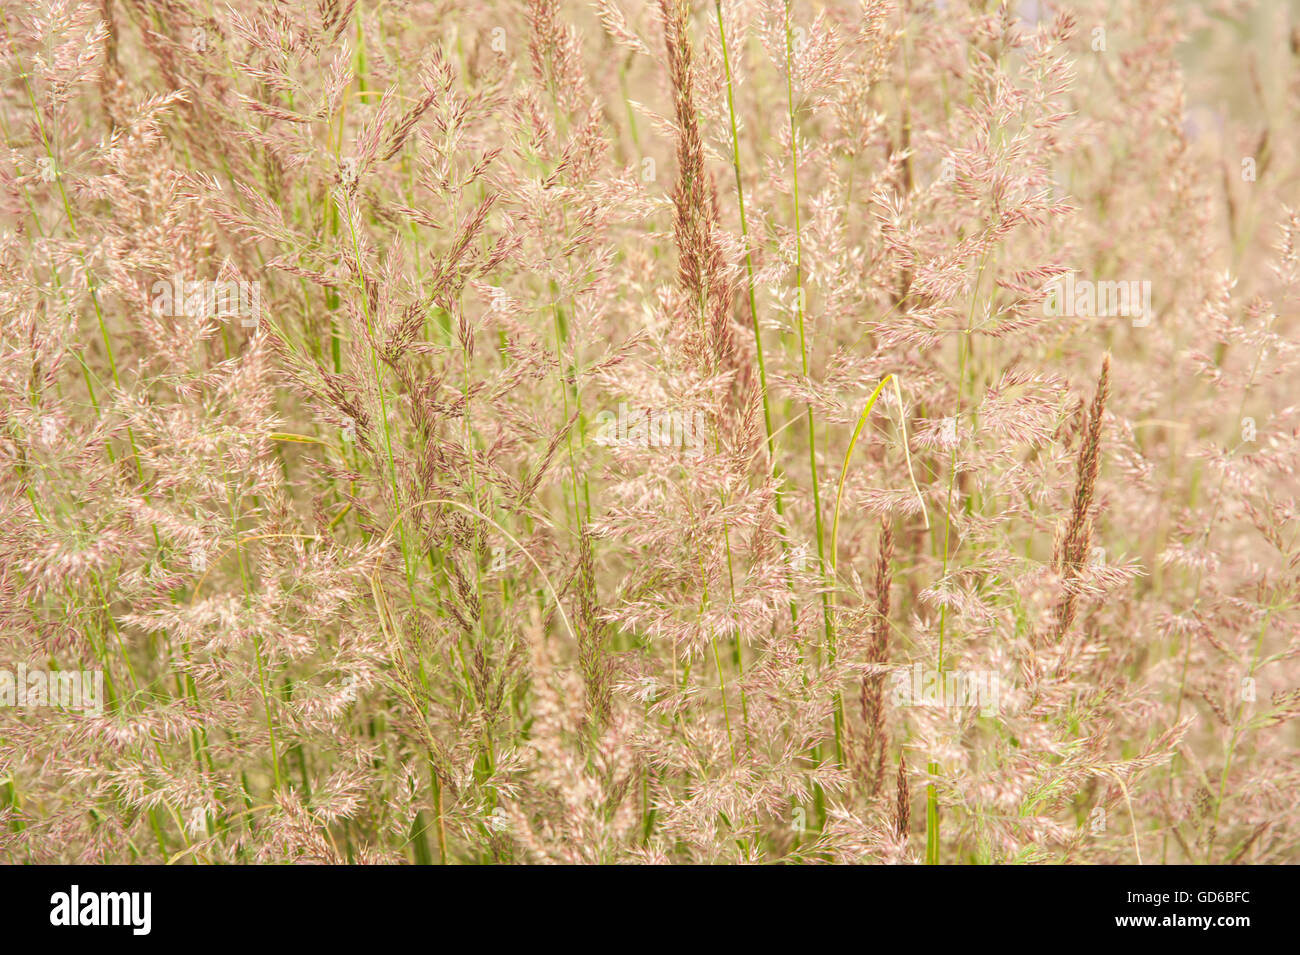 Landscape colour image of a Calamagrostis × acutiflora 'Overdam' grass perennial plant in flower taken in the autumn Stock Photo